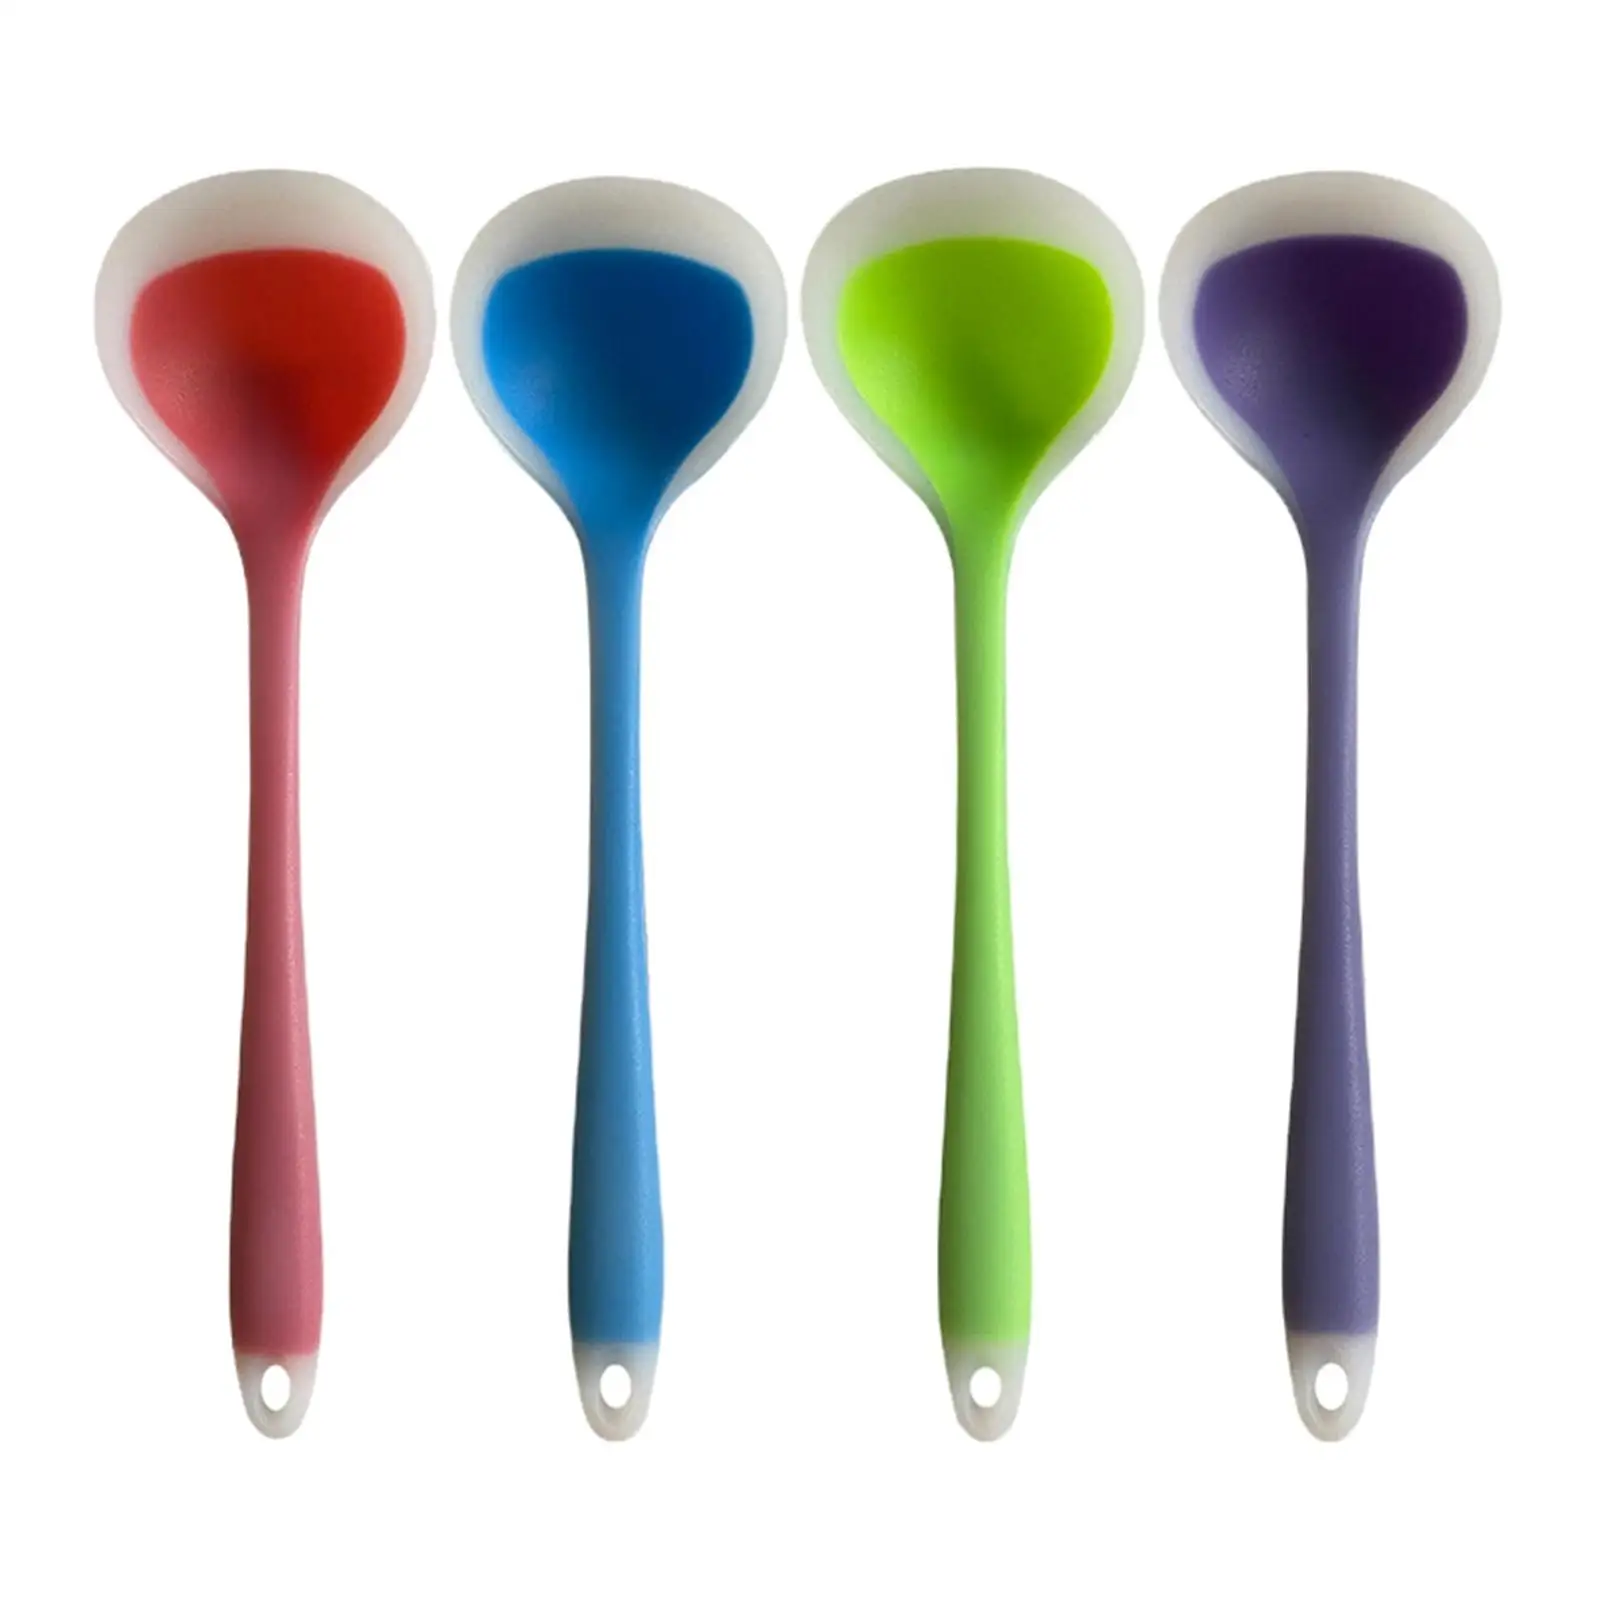 Heat Resistant Serving Spoon Flexible Silicone Soup Spoon Stirring Spoon for Stirring Cooking